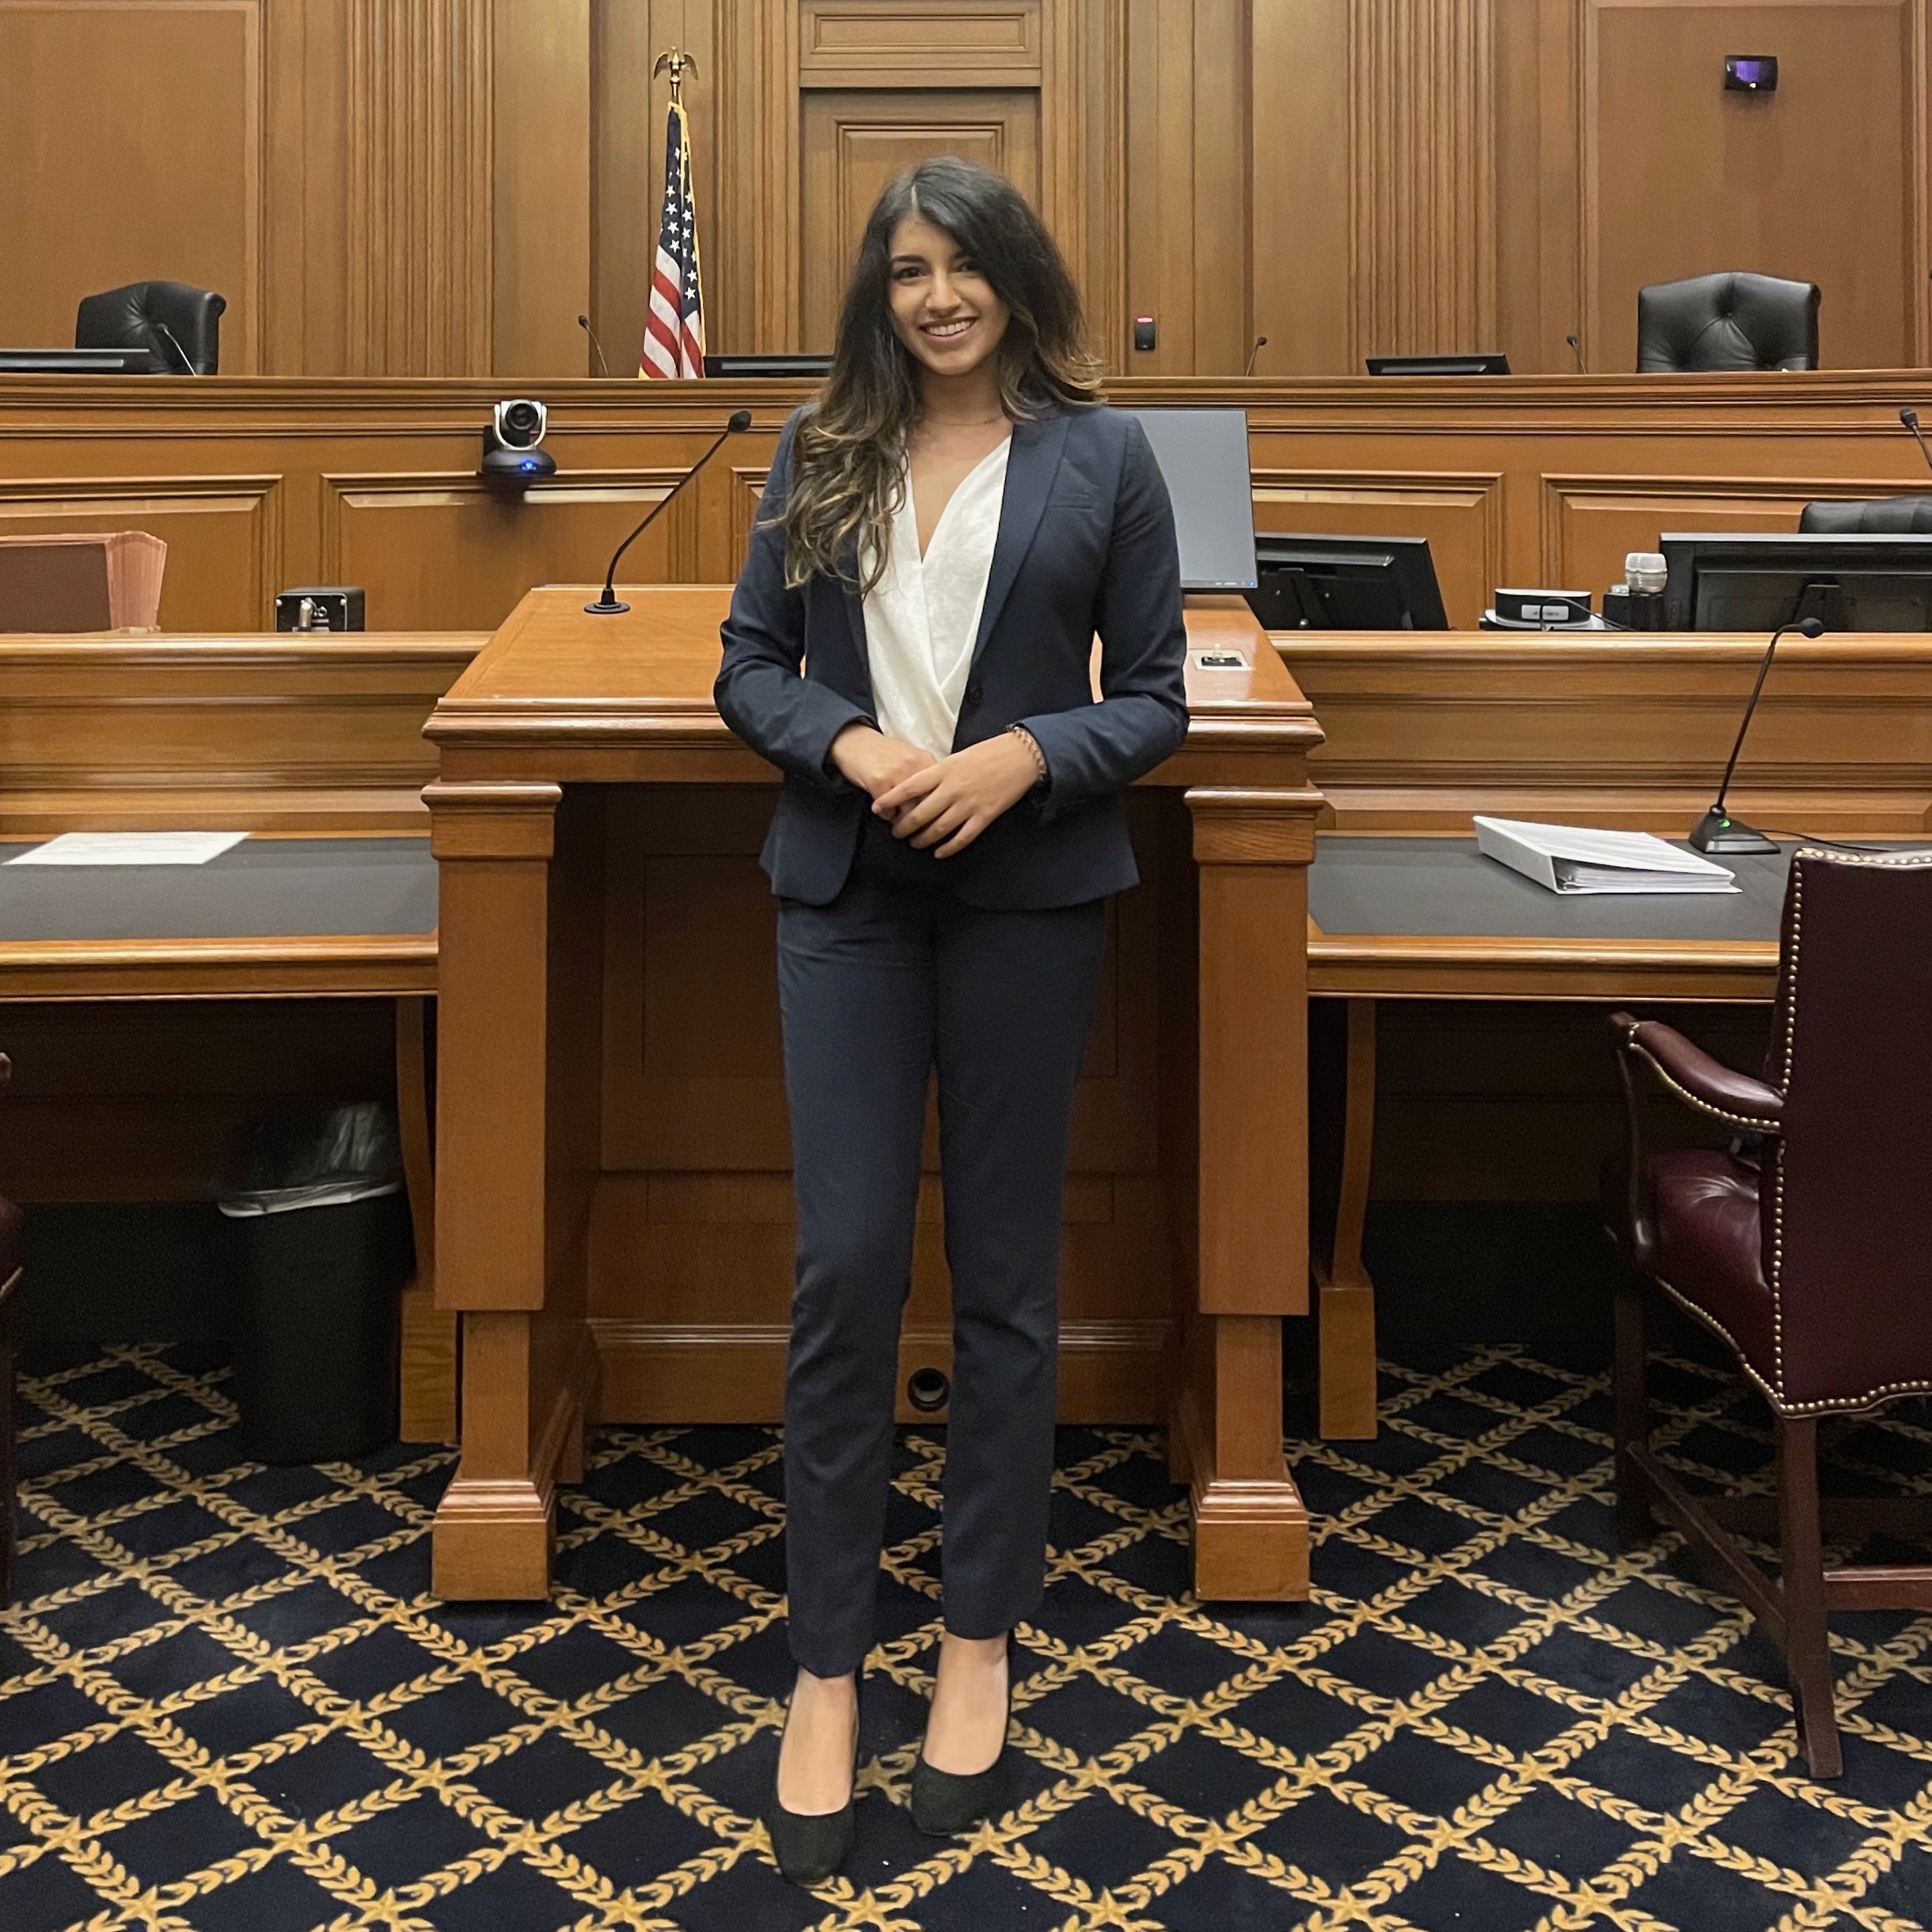 A woman wearing a black business suit smiles and stands in a courtroom.